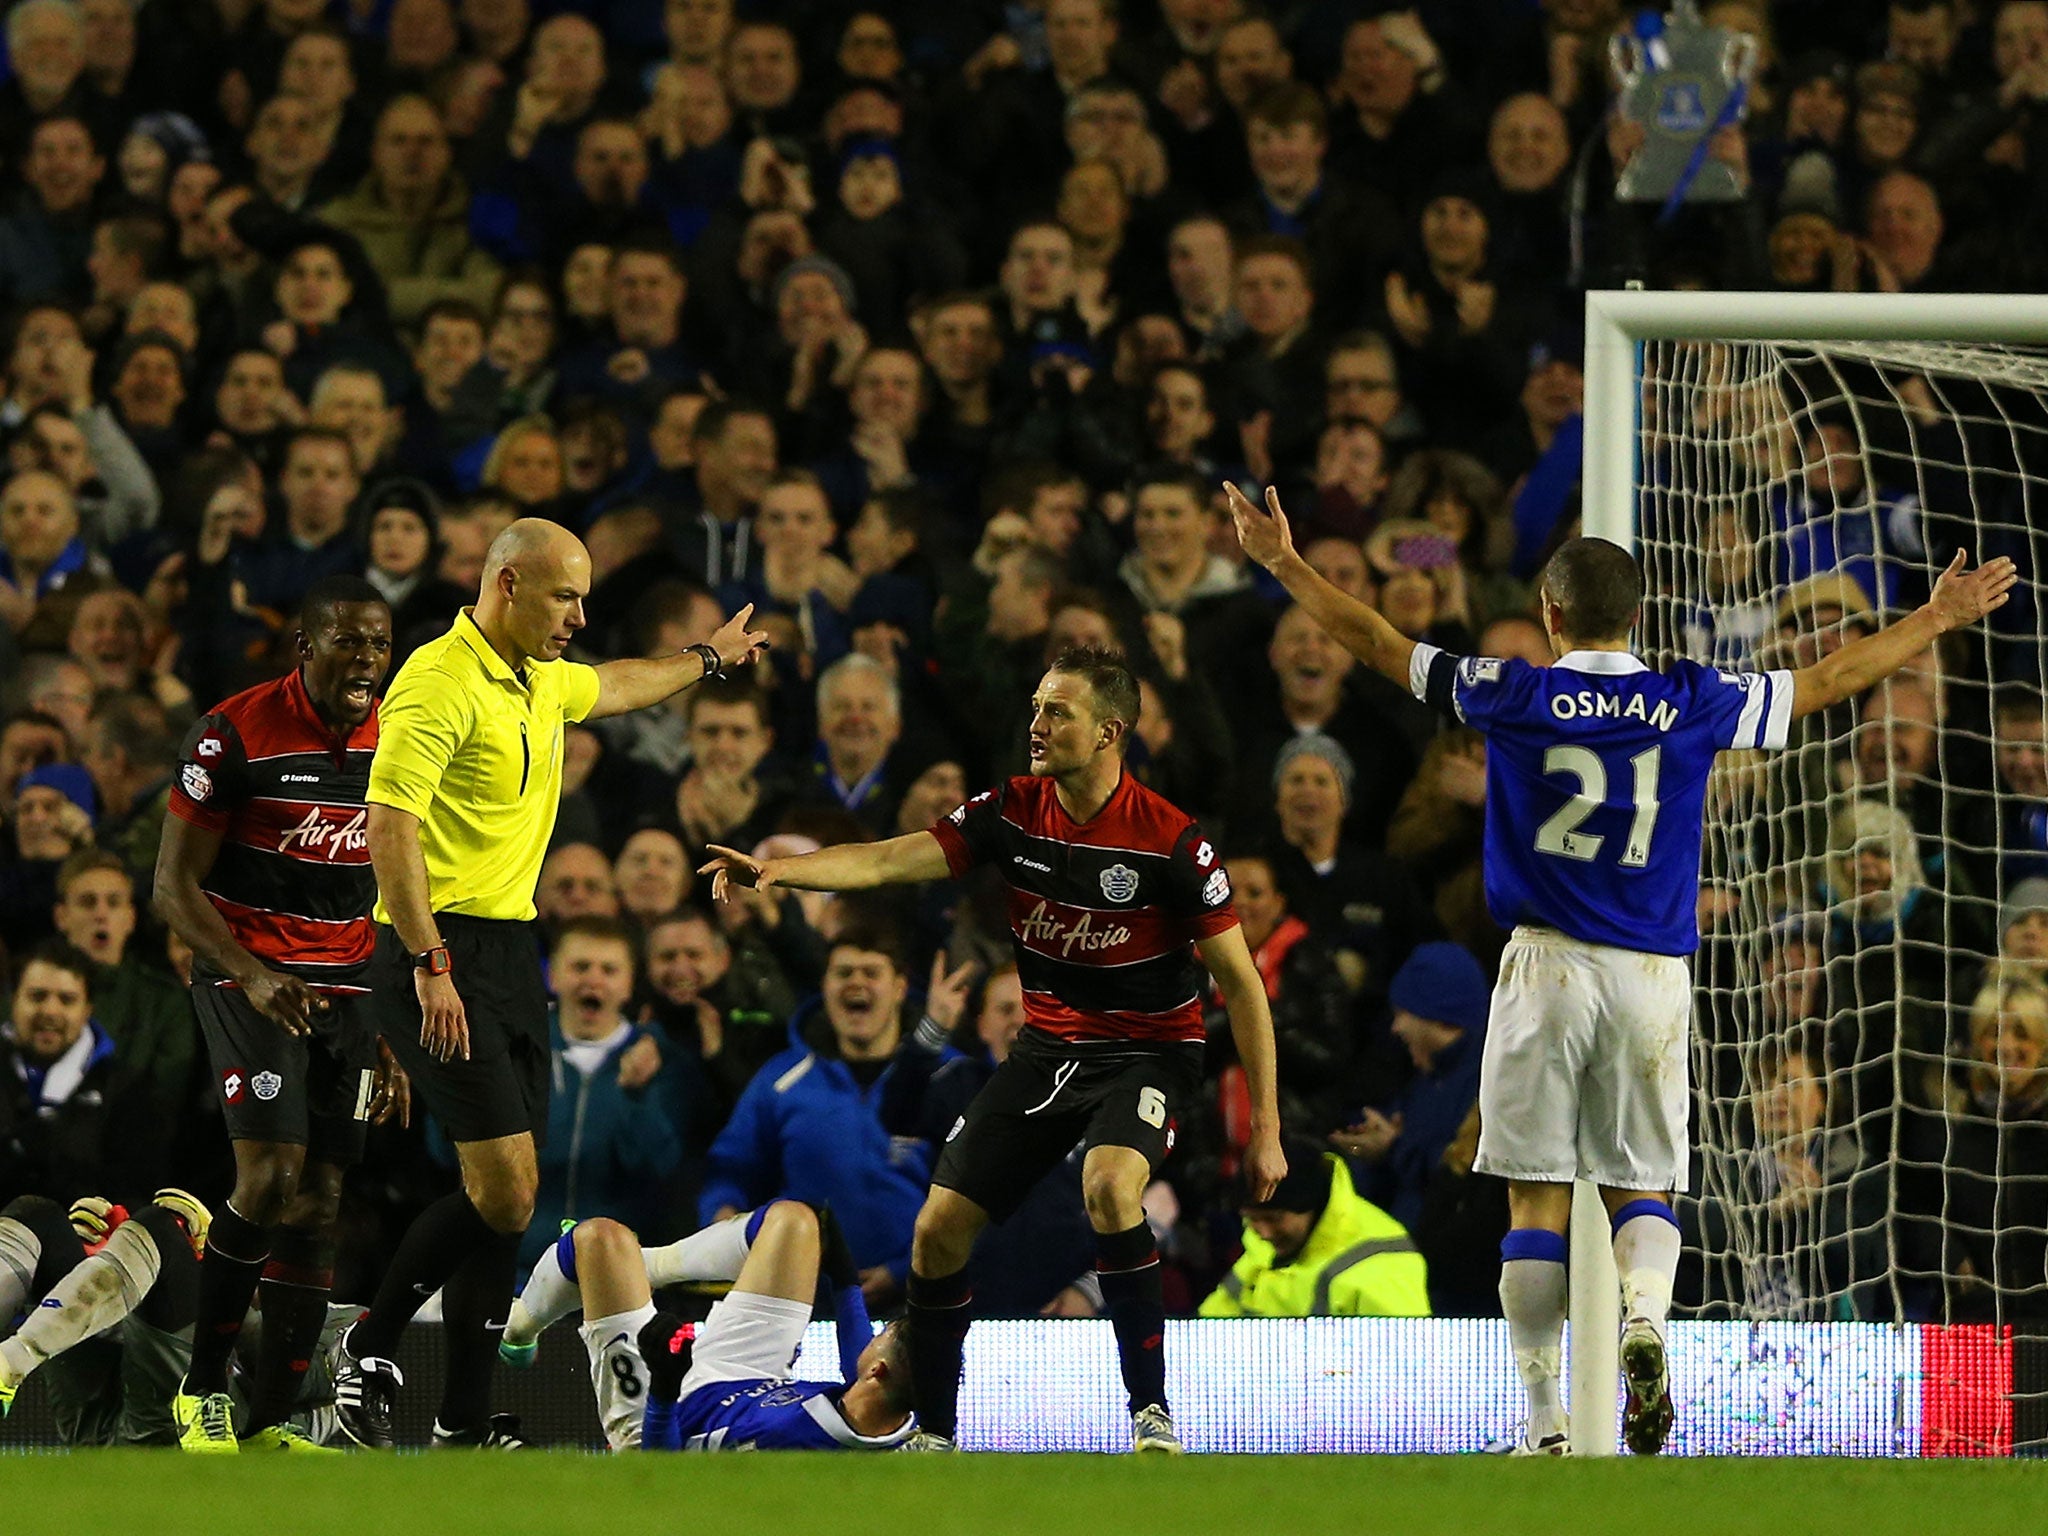 QPR'S Clint Hill appeals to Howard Webb after the the referee had awarded a penalty to Everton during a FA Cup Third Round match between the two sides at Goodison Park on January 4, 2014